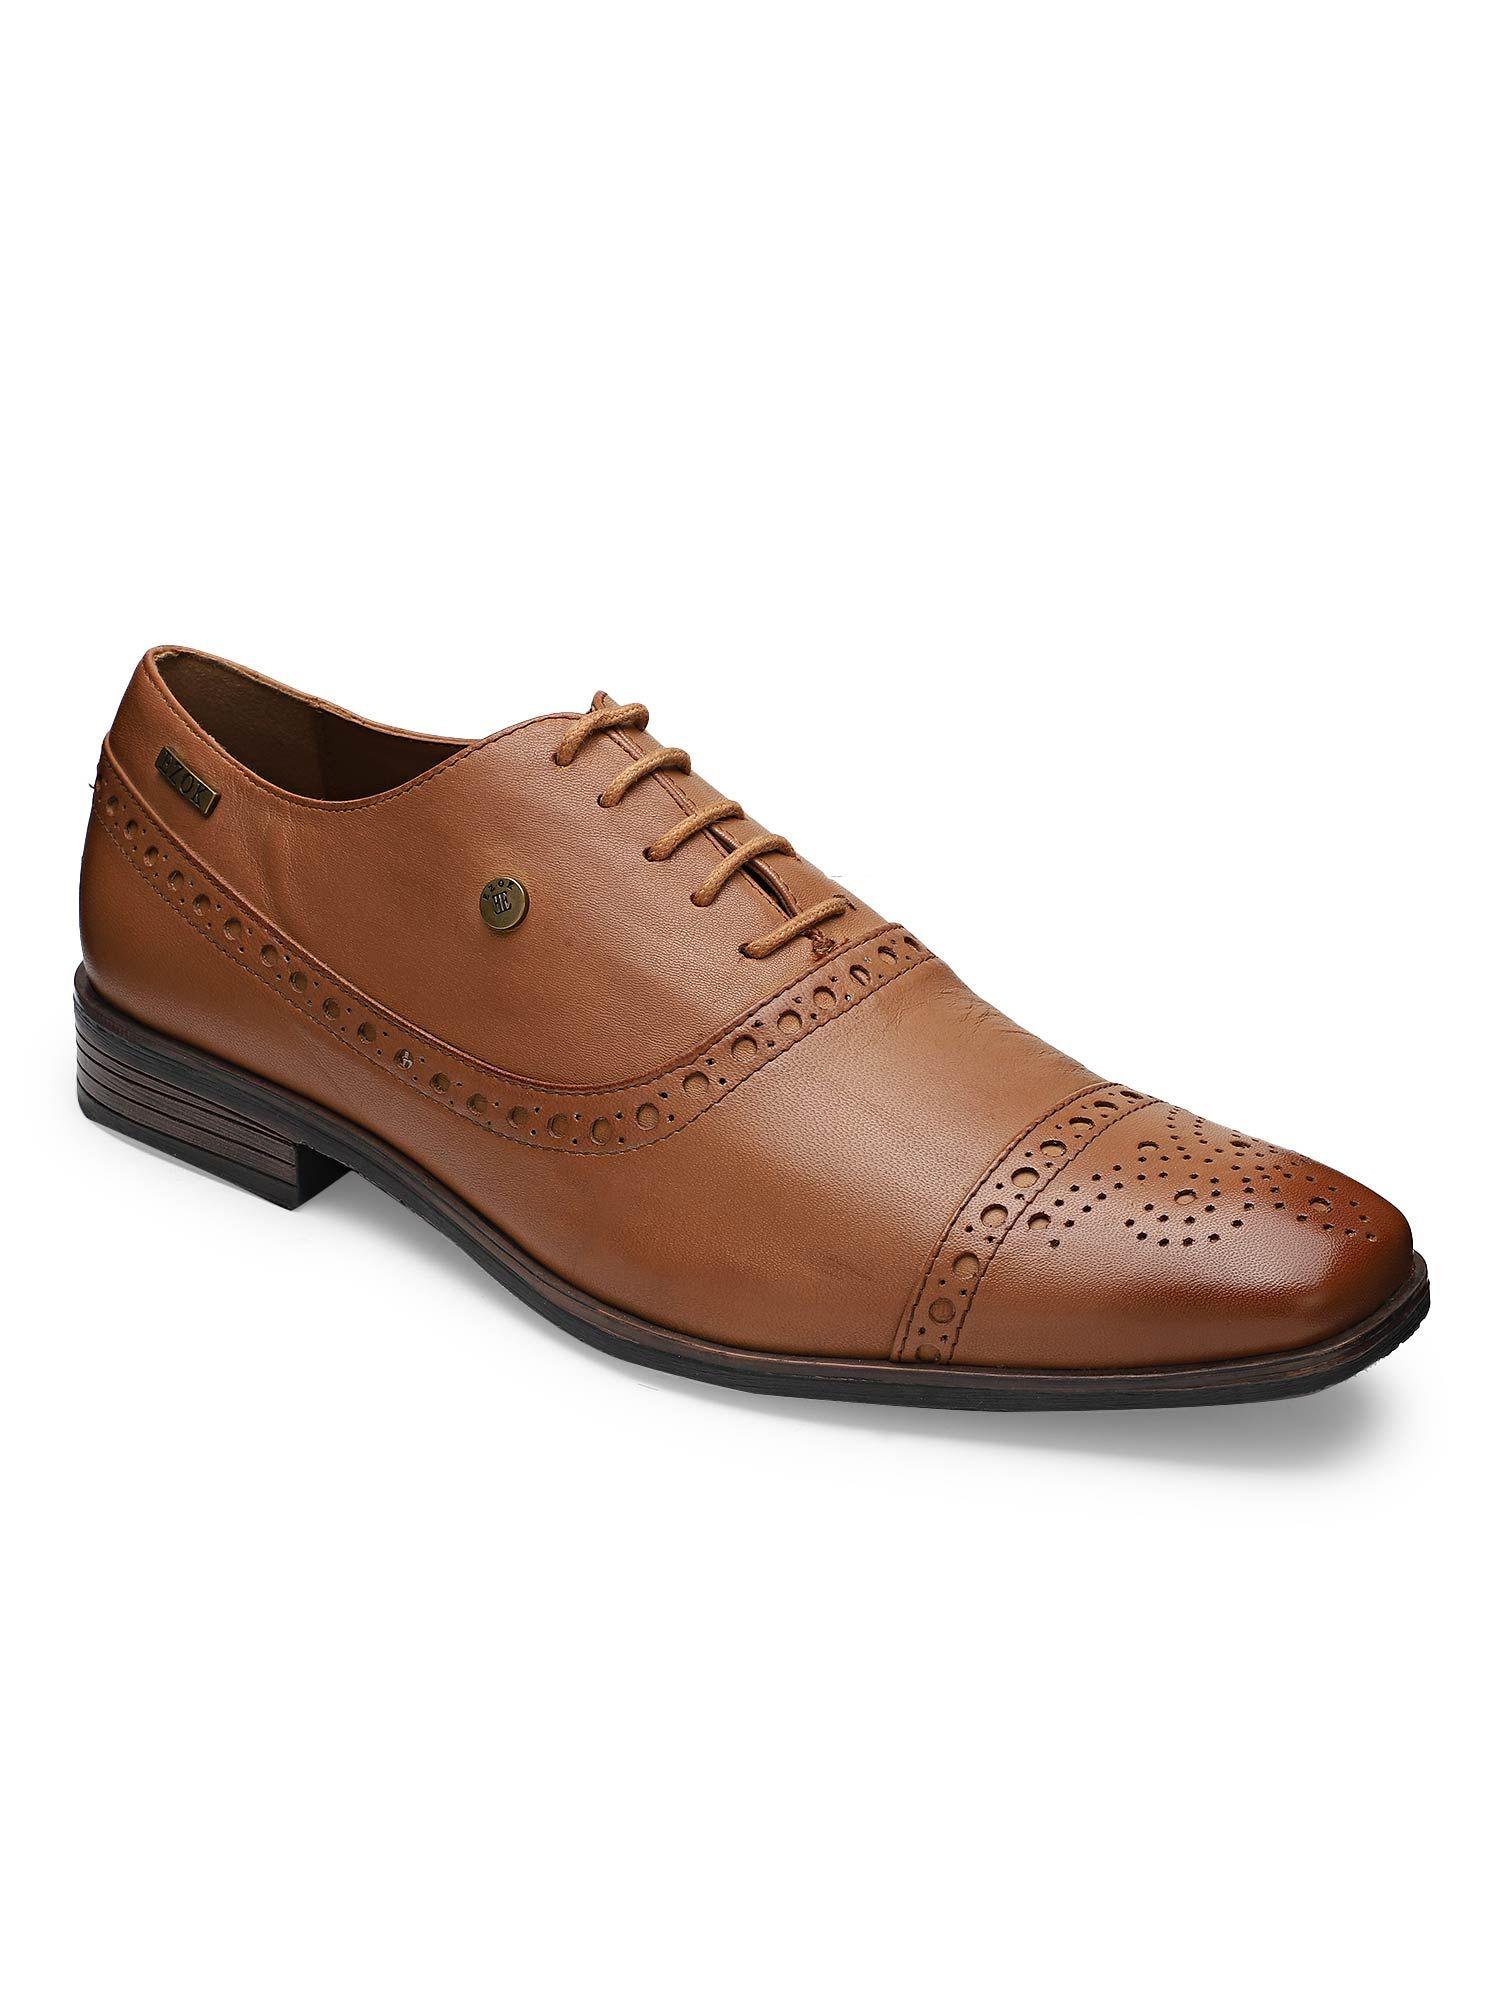 genuine leather tan solid formal brogue shoes for men